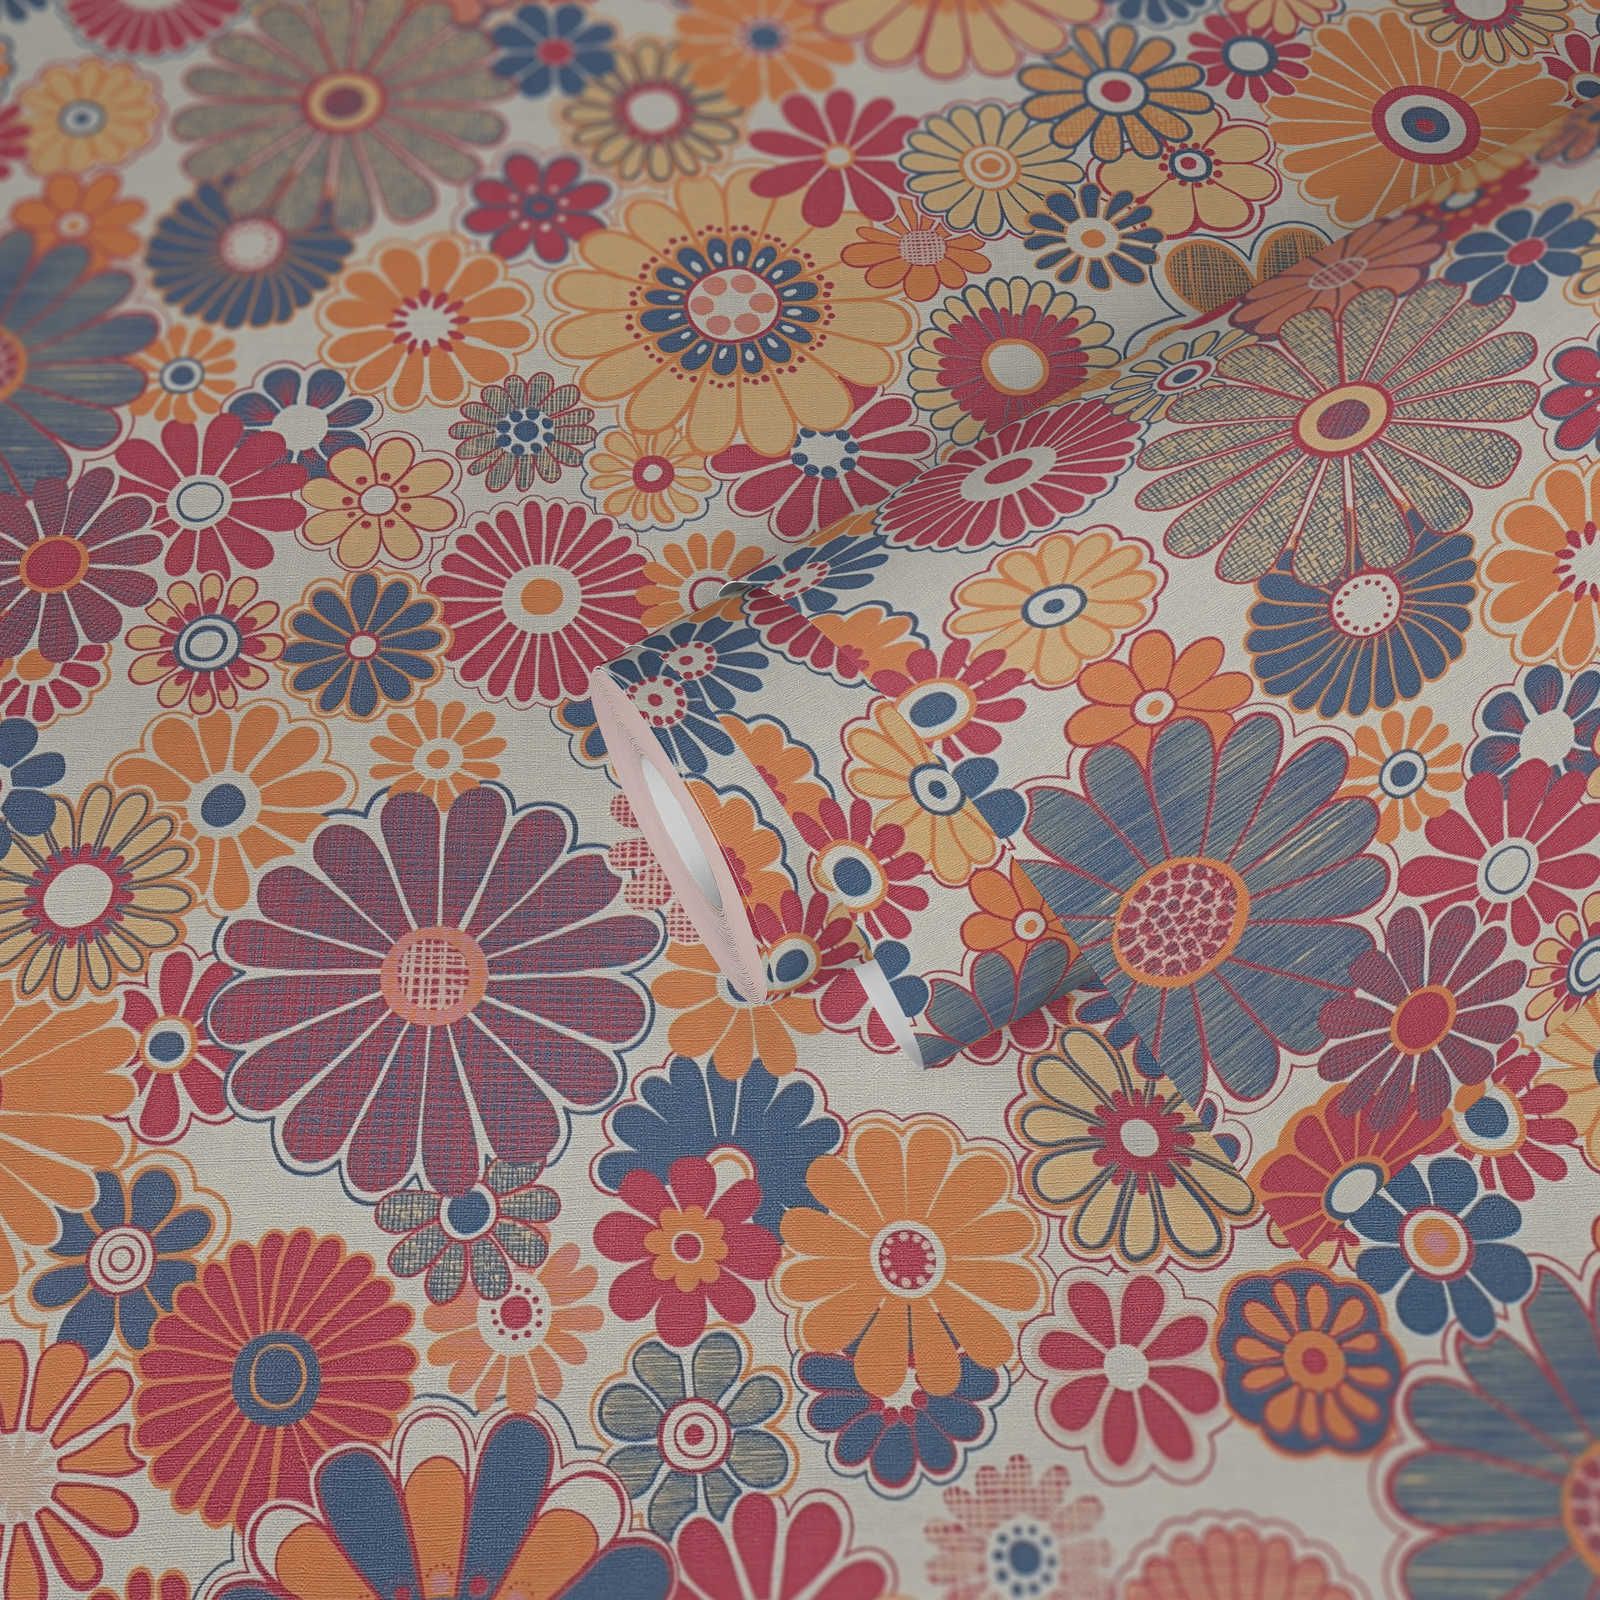             Retro non-woven wallpaper with floral pattern - red, blue, orange
        